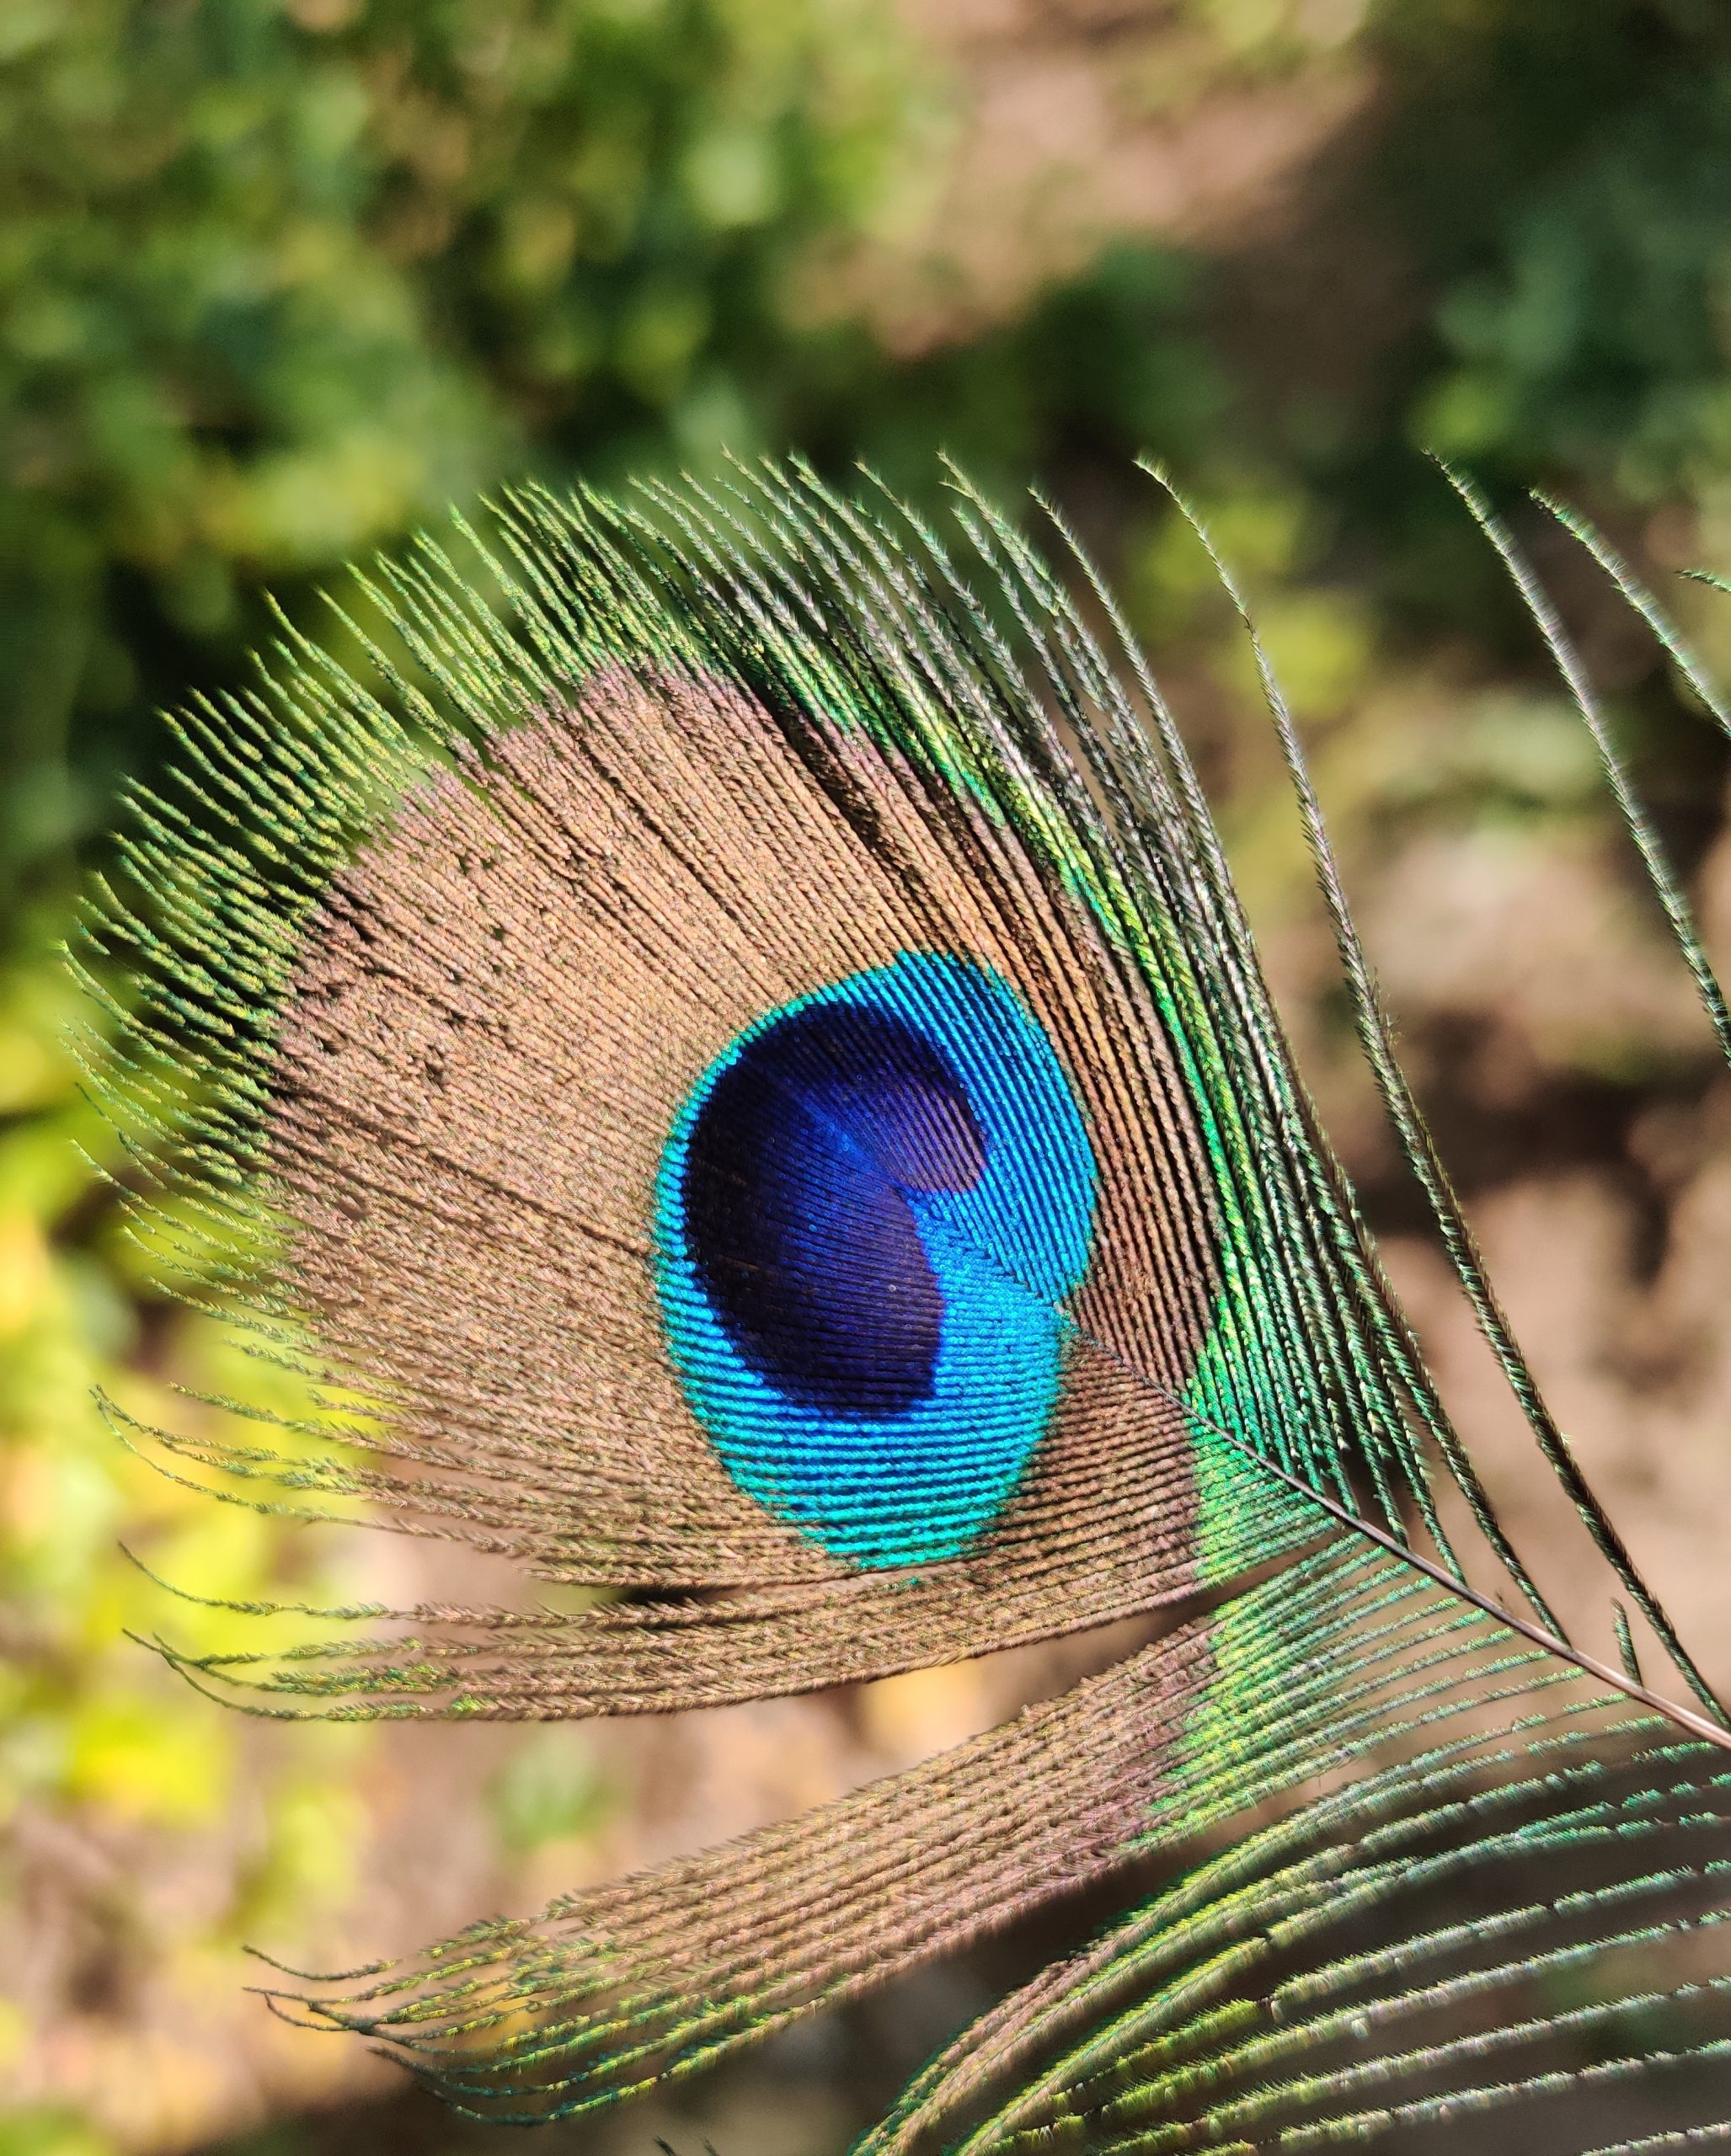 A peacock feather